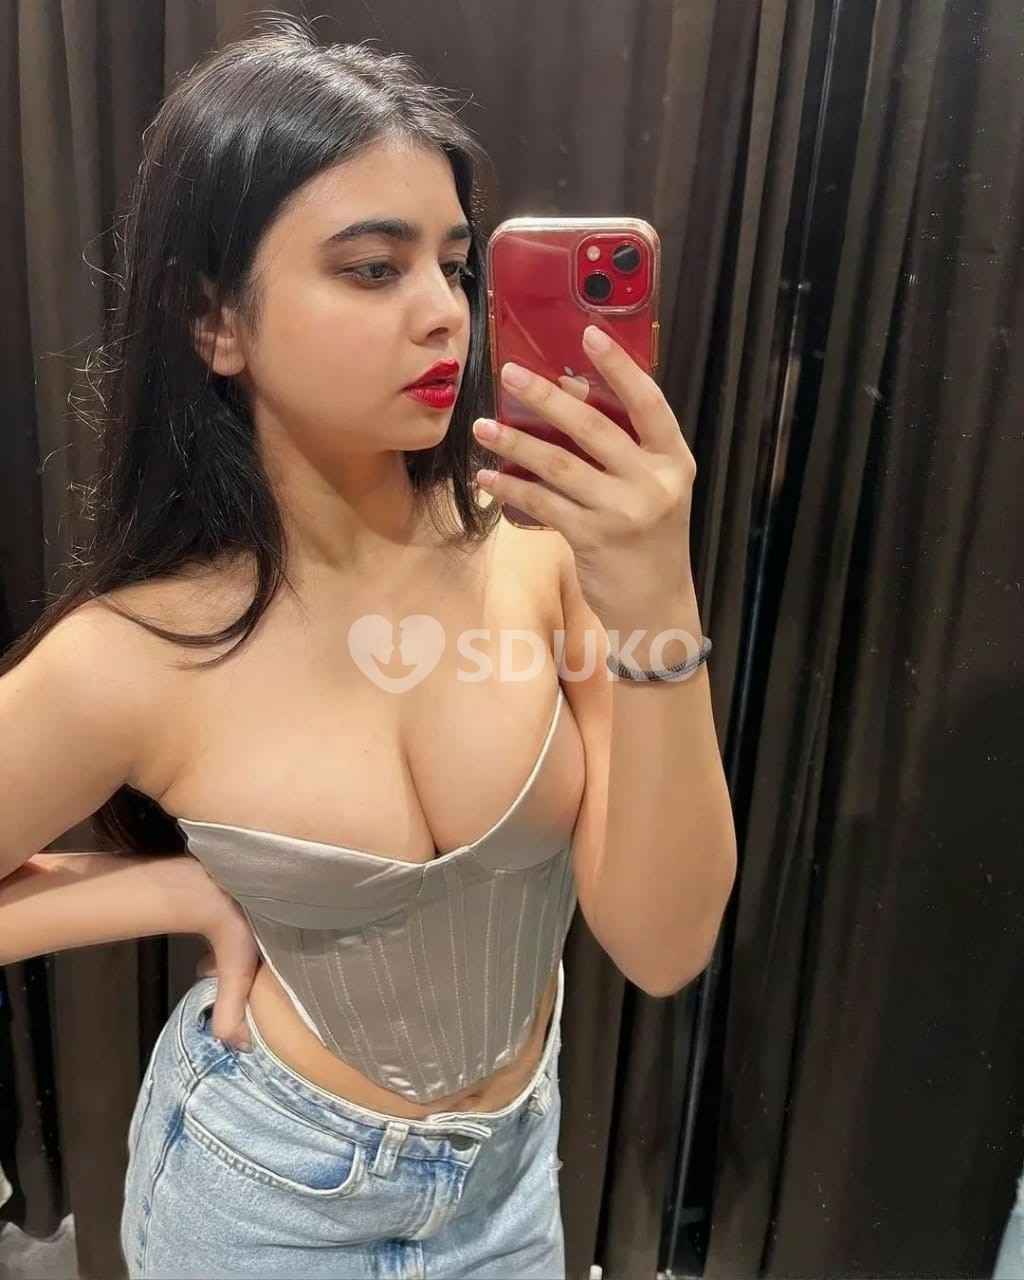 Pachim vihar ♥️24x7 AFFORDABLE CHEAPEST RATE SAFE CALL GIRL SERVICE...